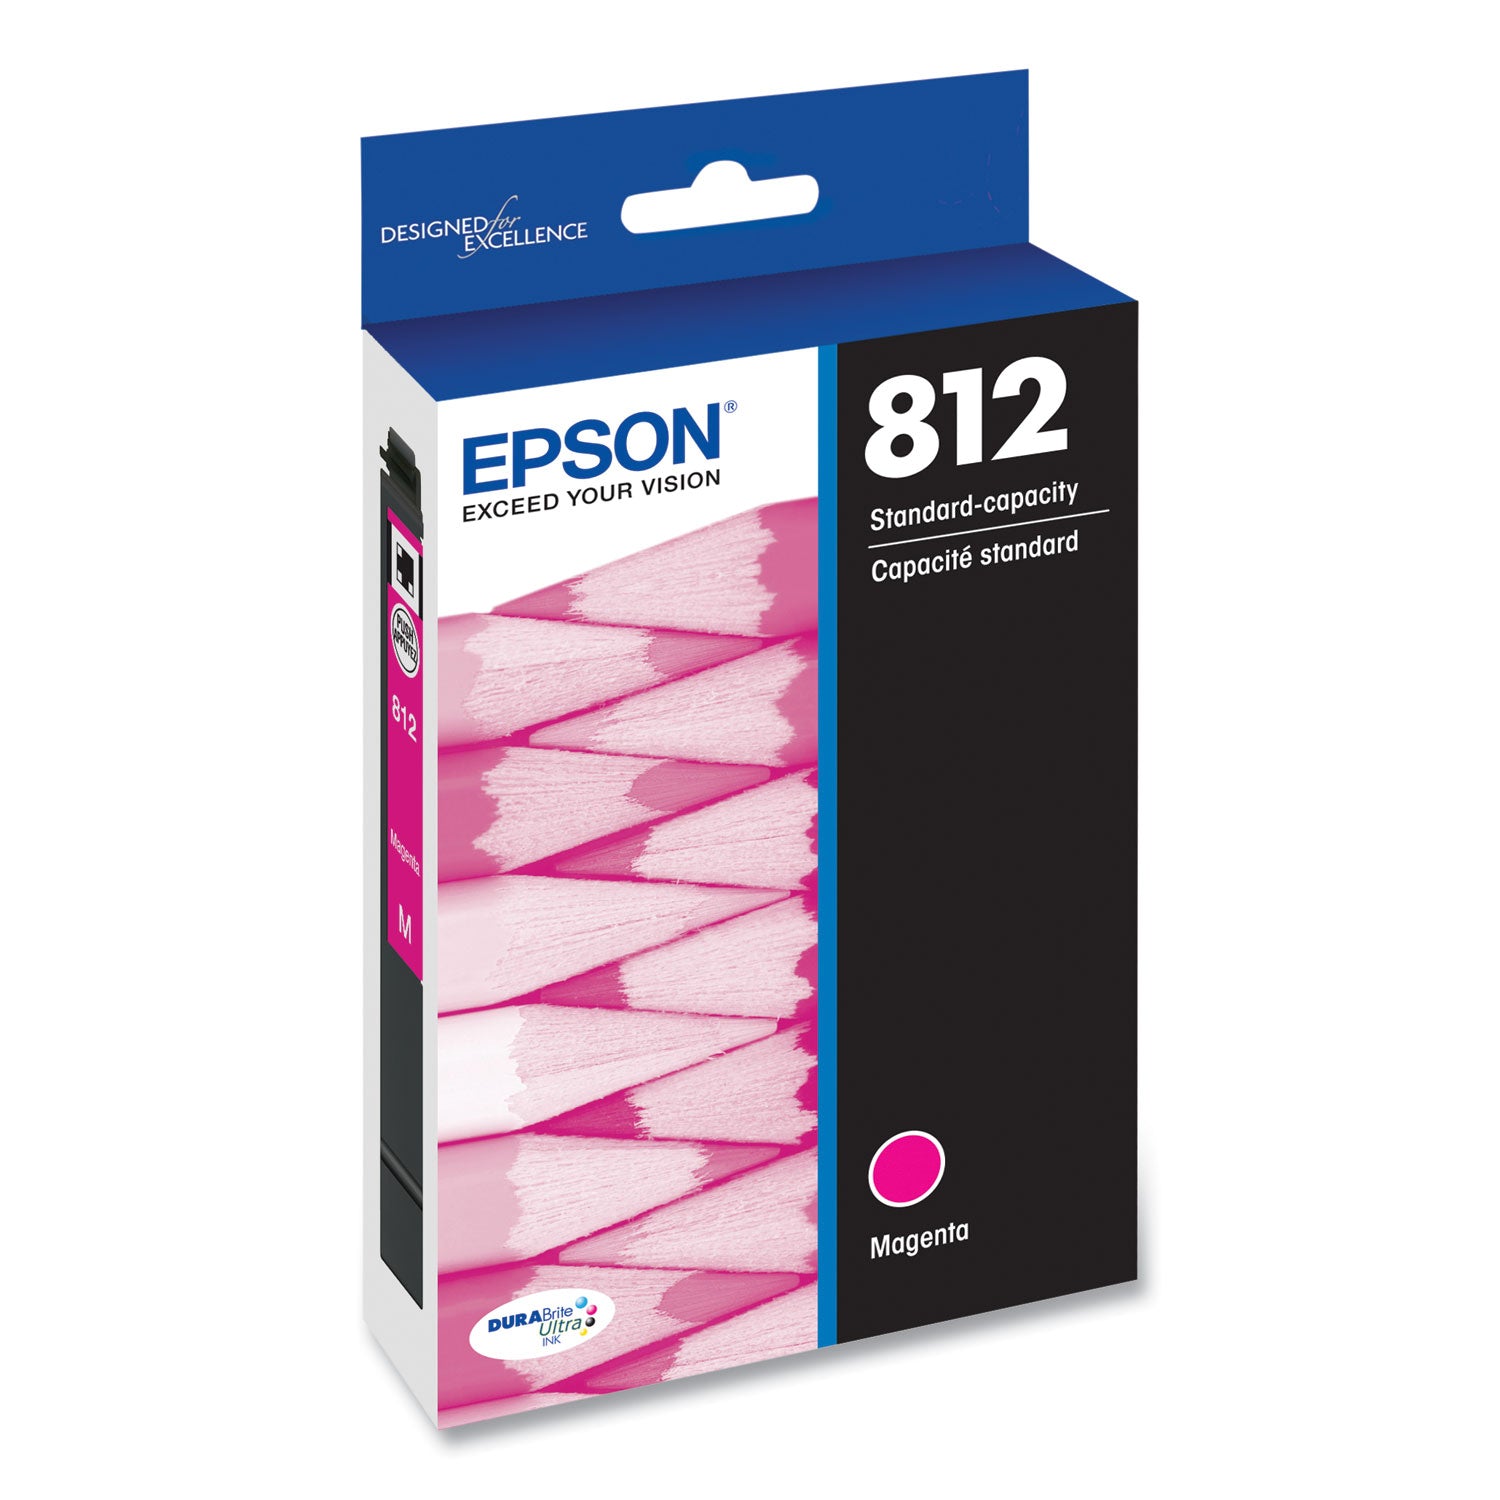 t812320-s-t812-durabrite-ultra-ink-300-page-yield-magenta_epst812320s - 2